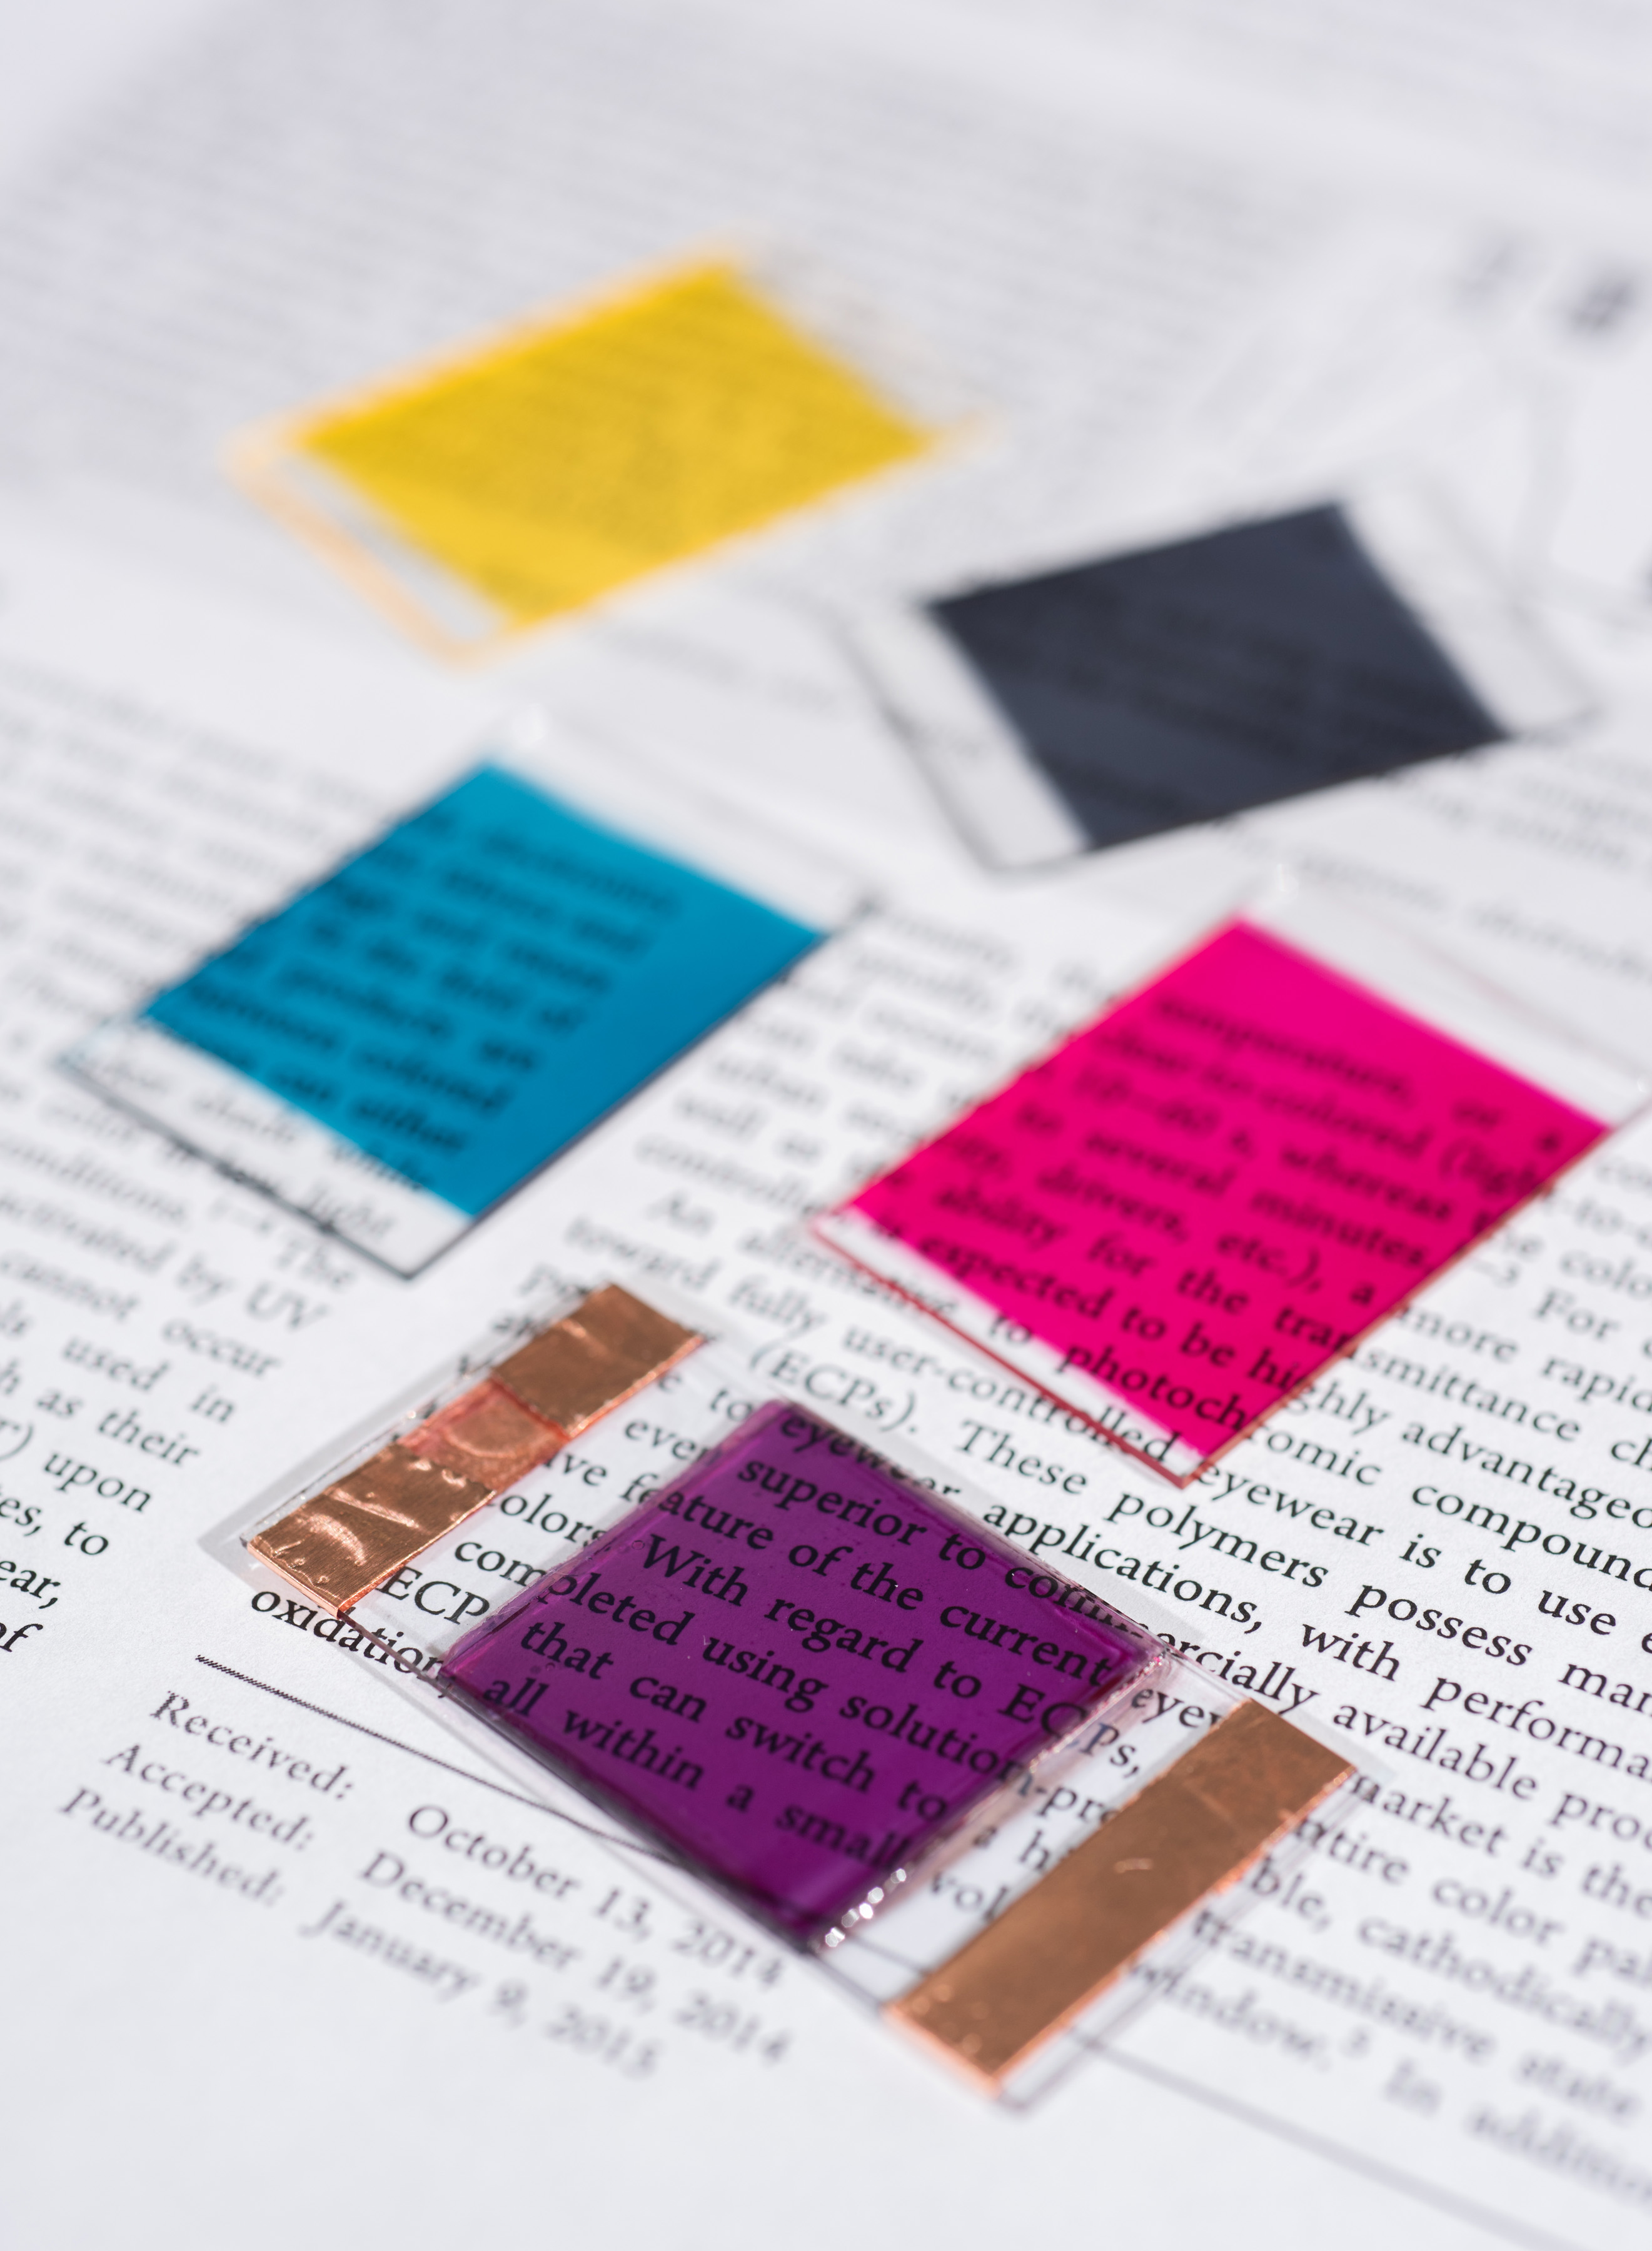 Samples show some of the colors researchers have produced in electrochromic polymers. The materials can be used for applications such as sunglasses and window tinting that can be turned on and off through the application of an electrical potential. (Credit: Rob Felt)